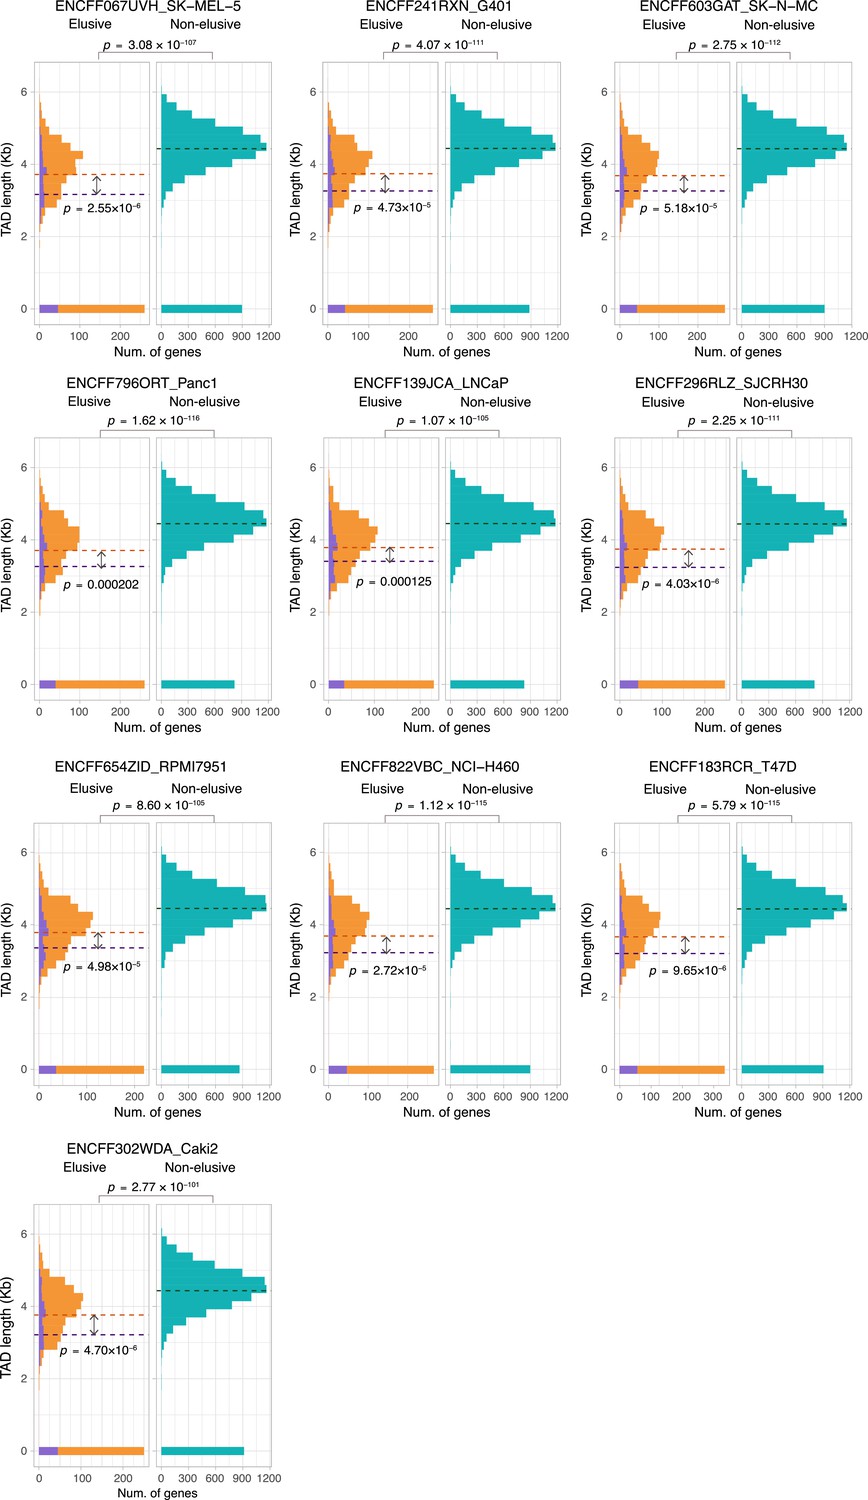 The impact of local genomic properties on the evolutionary fate of genes